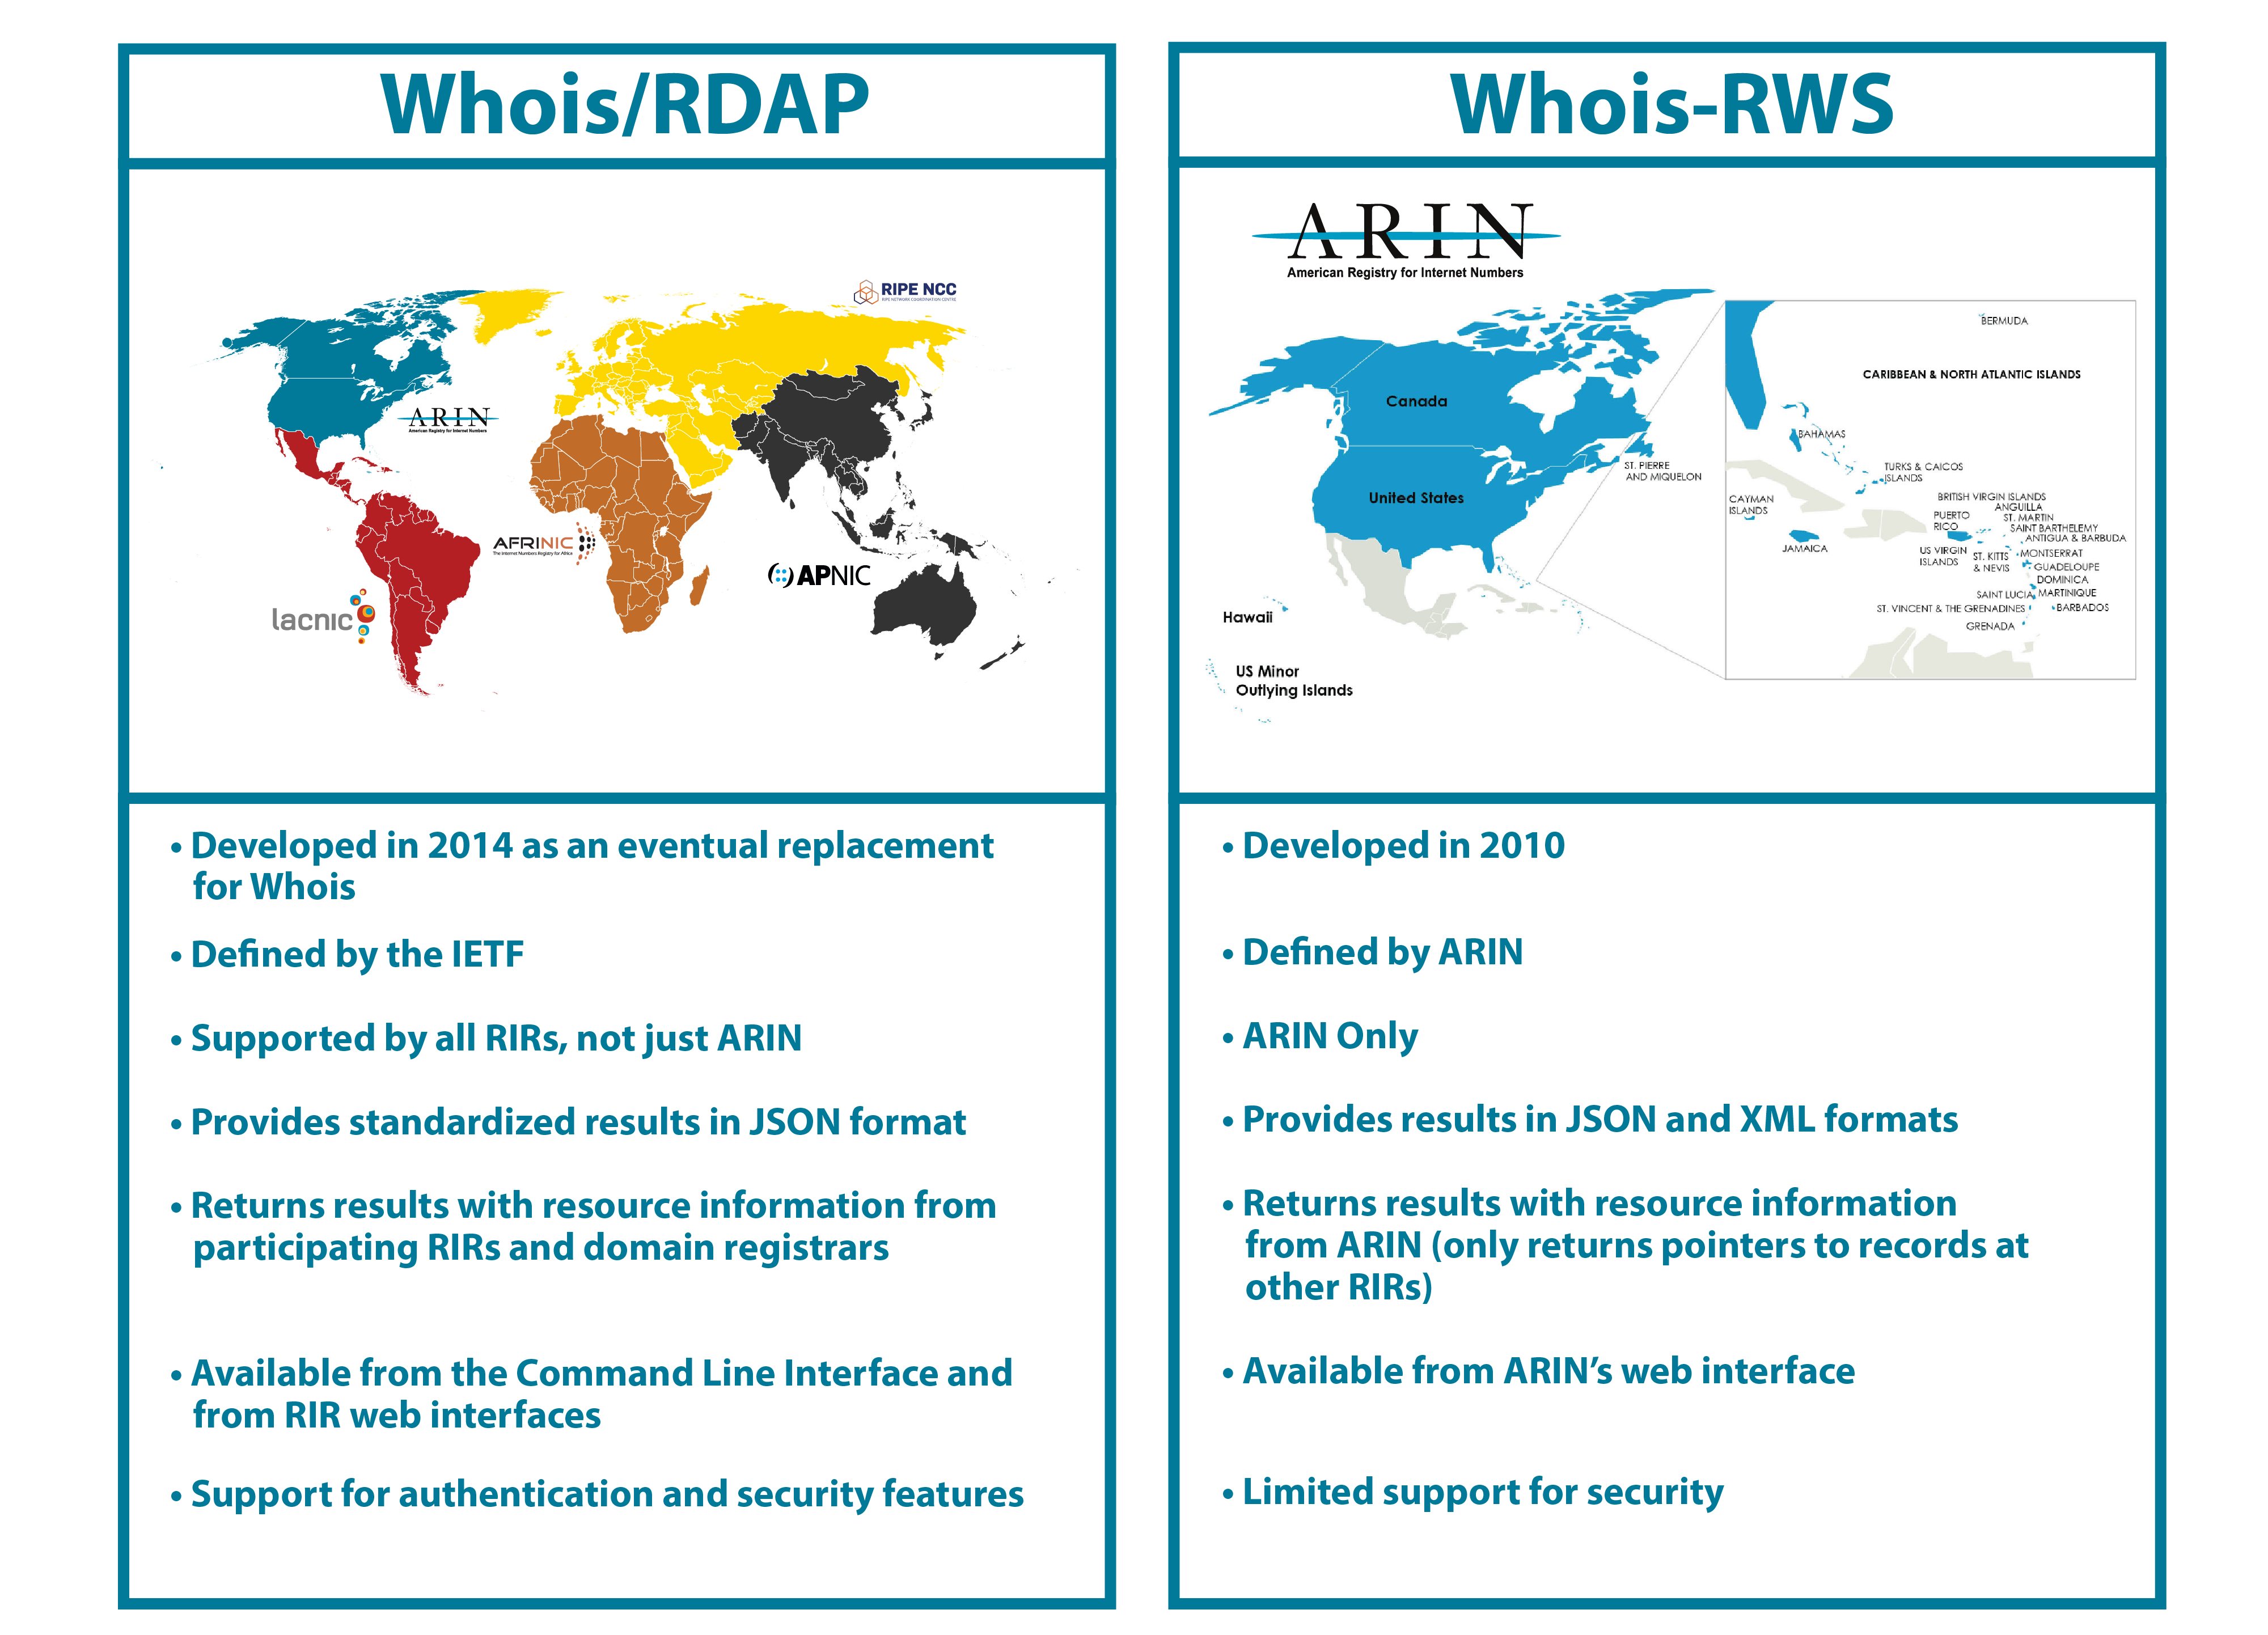 graphic showing differences between Whois/RDAP and Whois-RWS